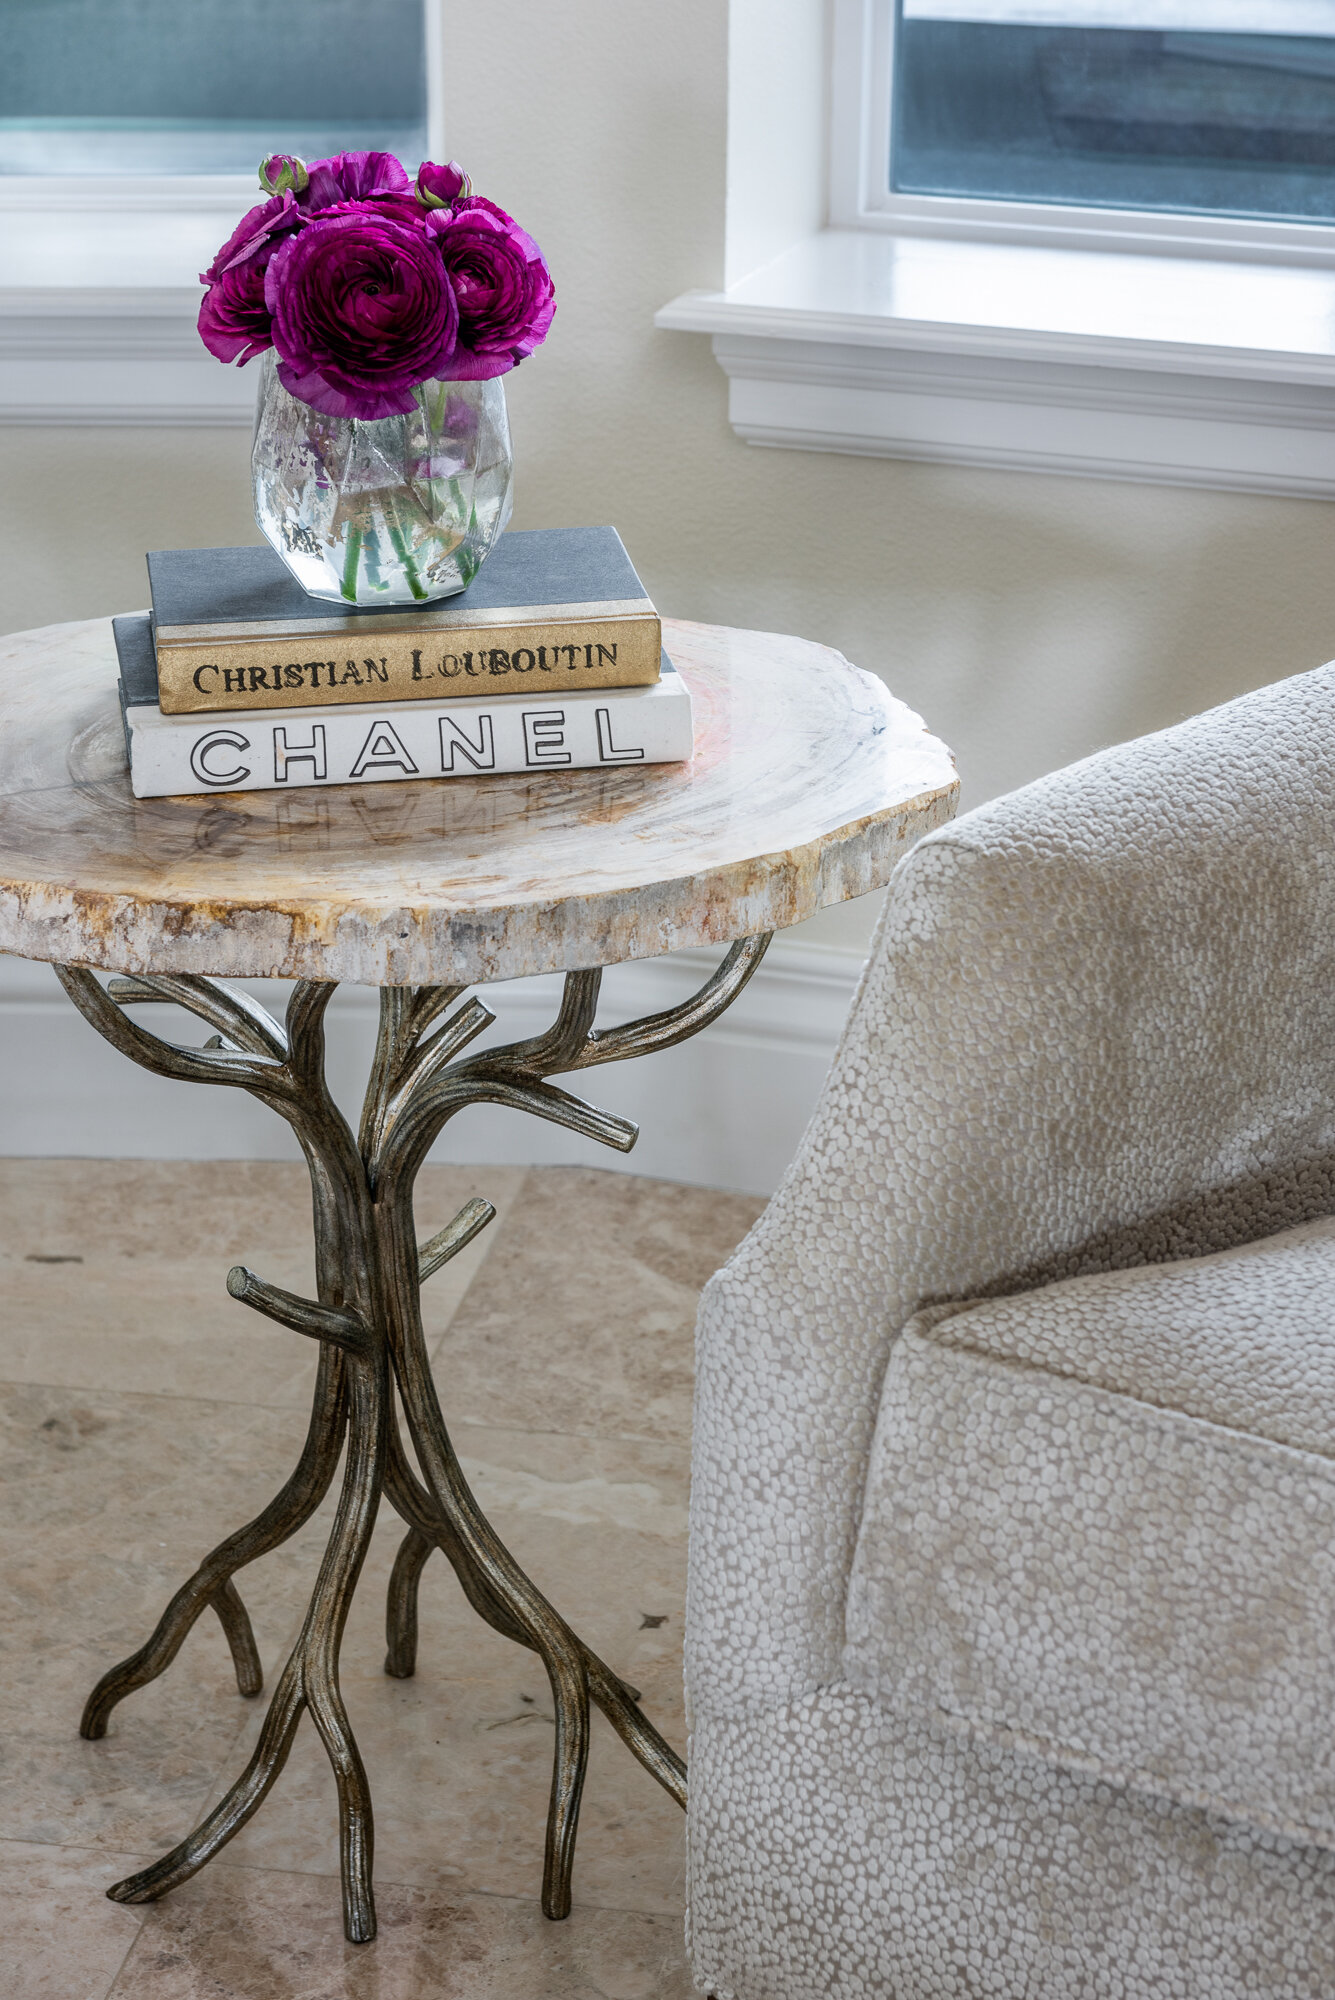 Side table with silver branch details and books and flowers